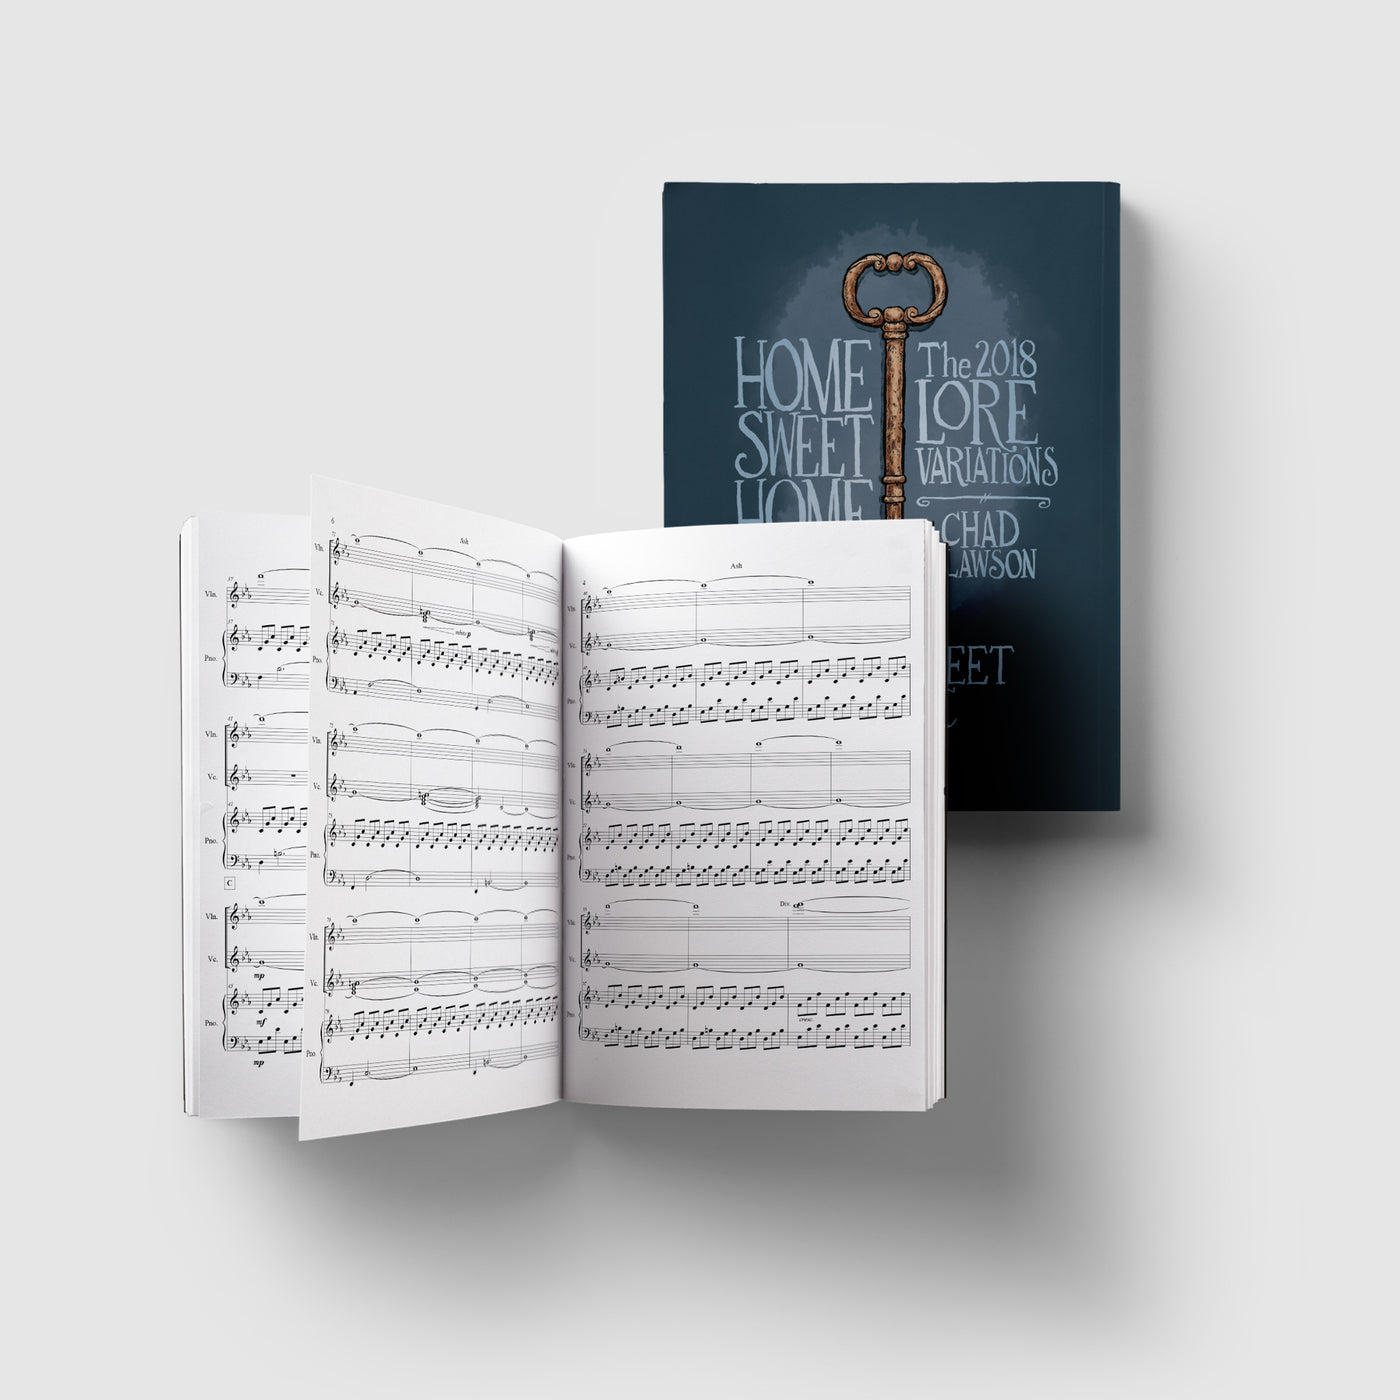 Home Sweet Home - The Lore Variations 2018 (Songbook & Sheet Music)